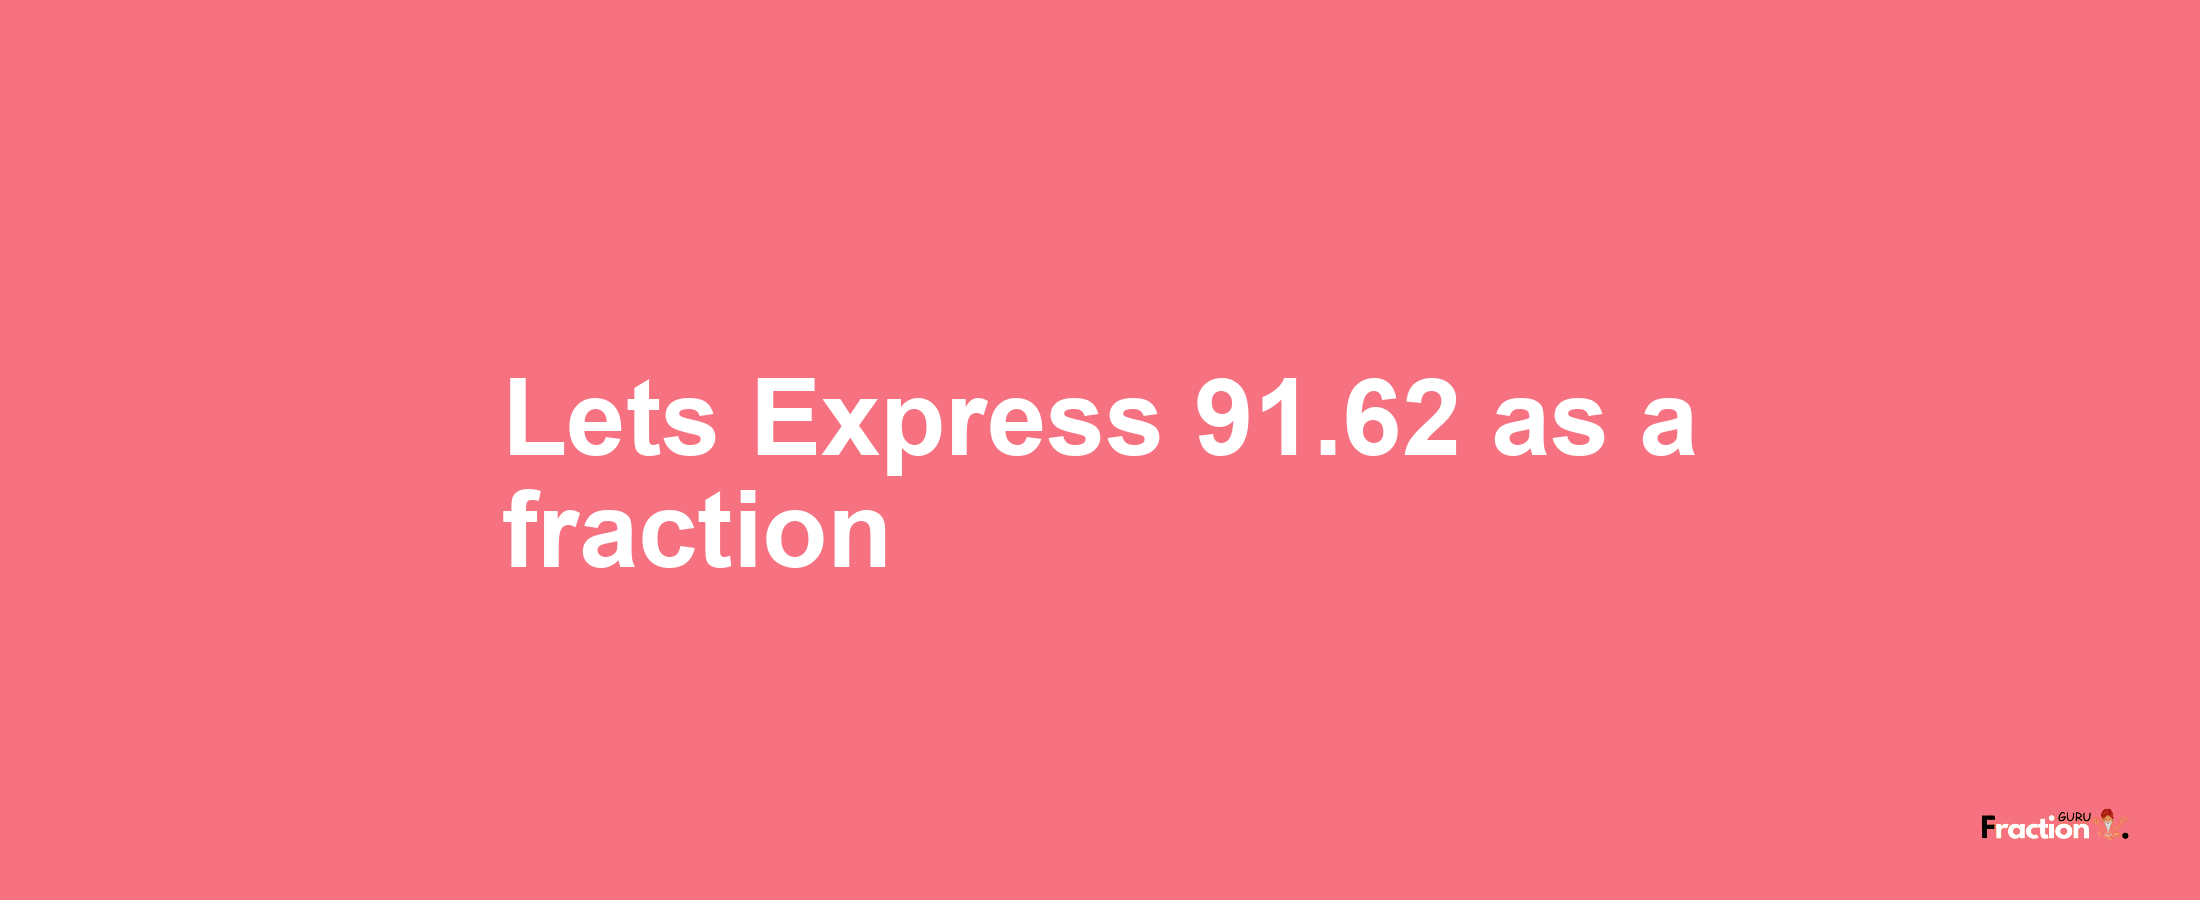 Lets Express 91.62 as afraction